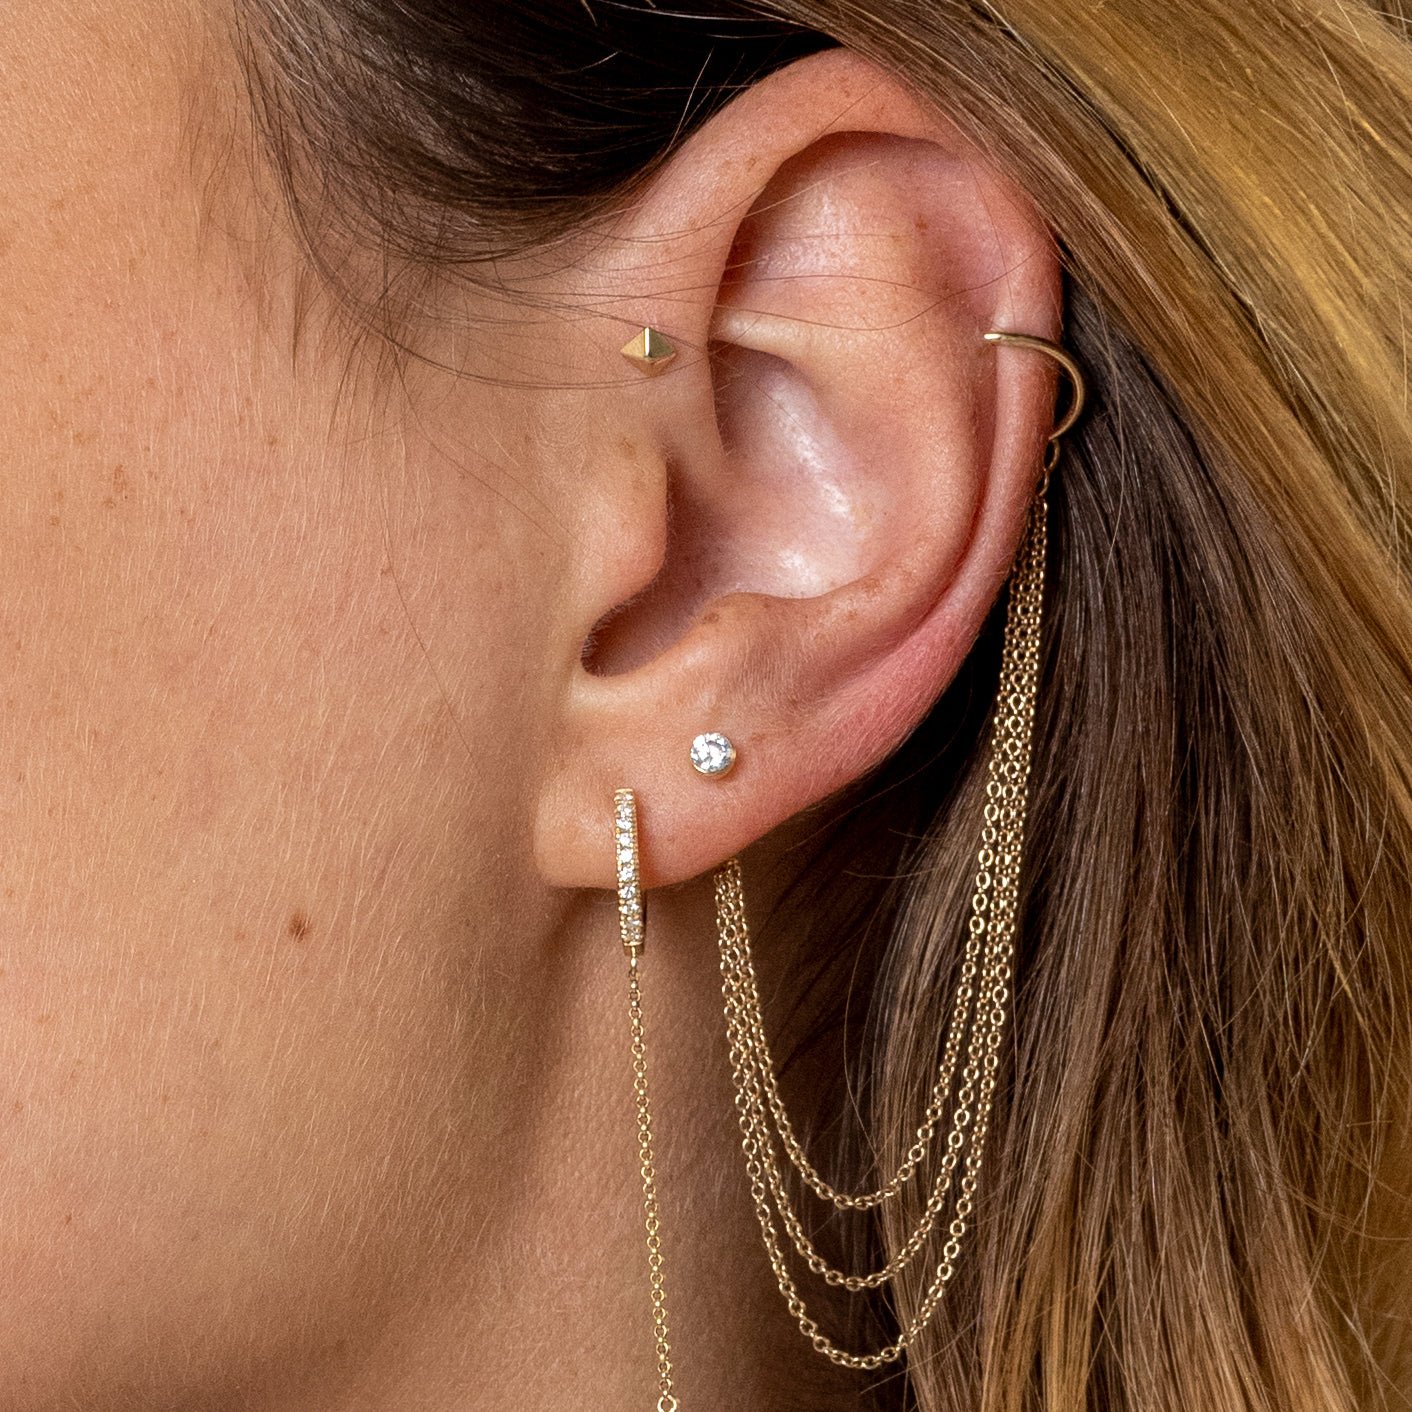 Pyramid Stud 14k Gold Cartilage Earring